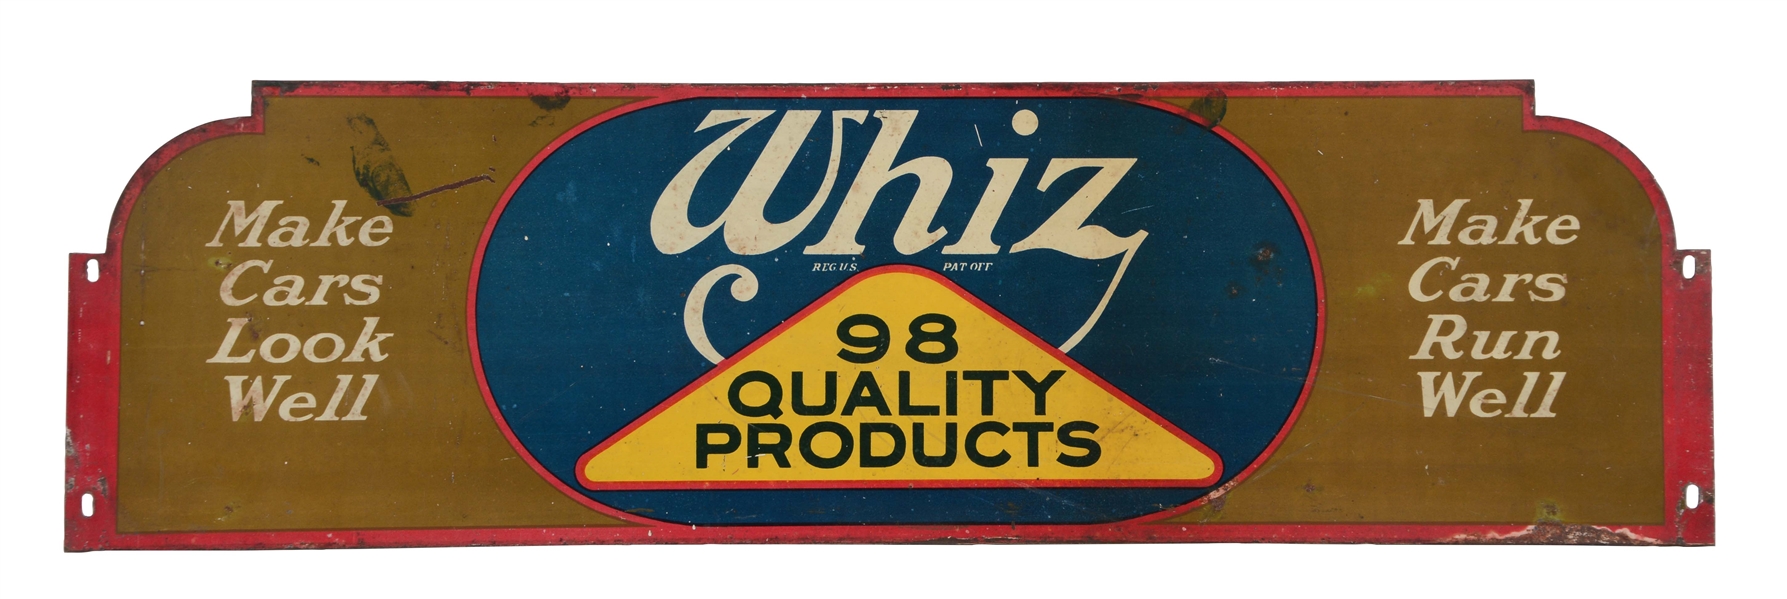 WHIZ QUALITY AUTOMOTIVE PRODUCTS TIN RACK SIGN.